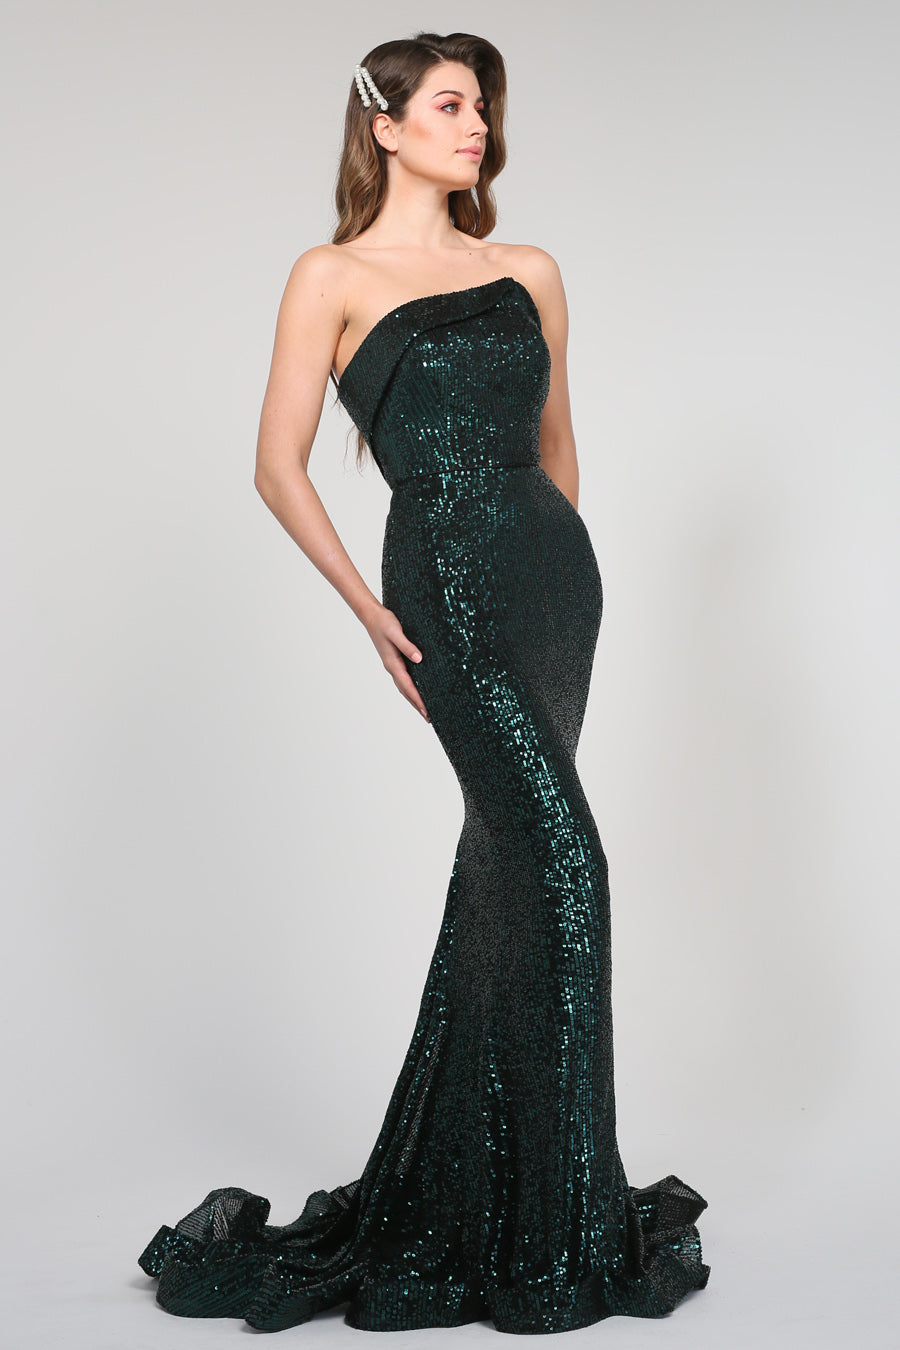 Tina Holly Couture TA361 Emerald Green Sequin Mermaid Formal Dress Tina Holly Couture$ AfterPay Humm ZipPay LayBuy Sezzle